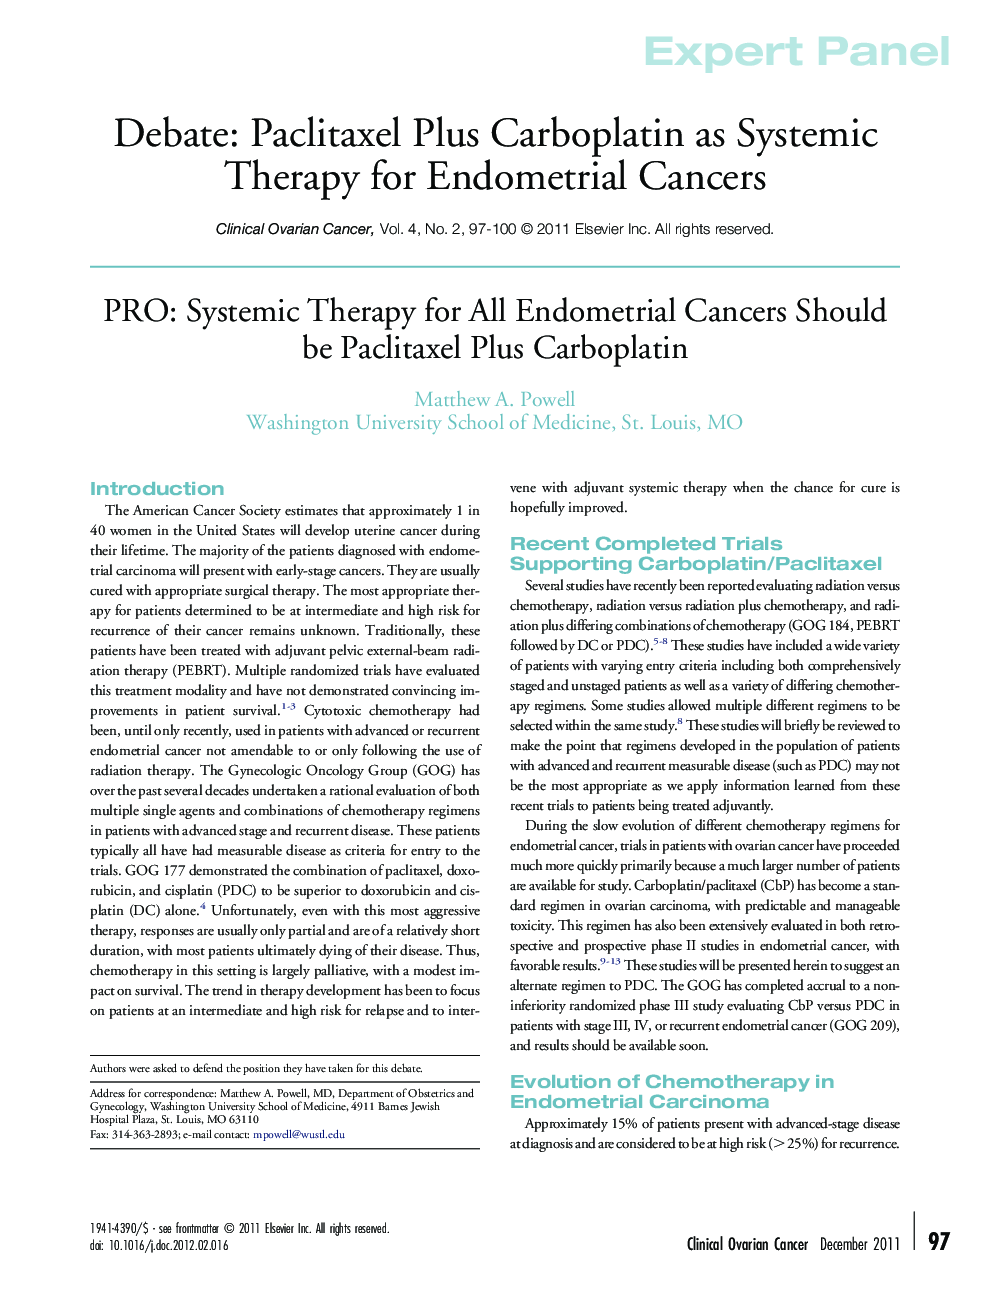 PRO: Systemic Therapy for All Endometrial Cancers Should be Paclitaxel Plus Carboplatin